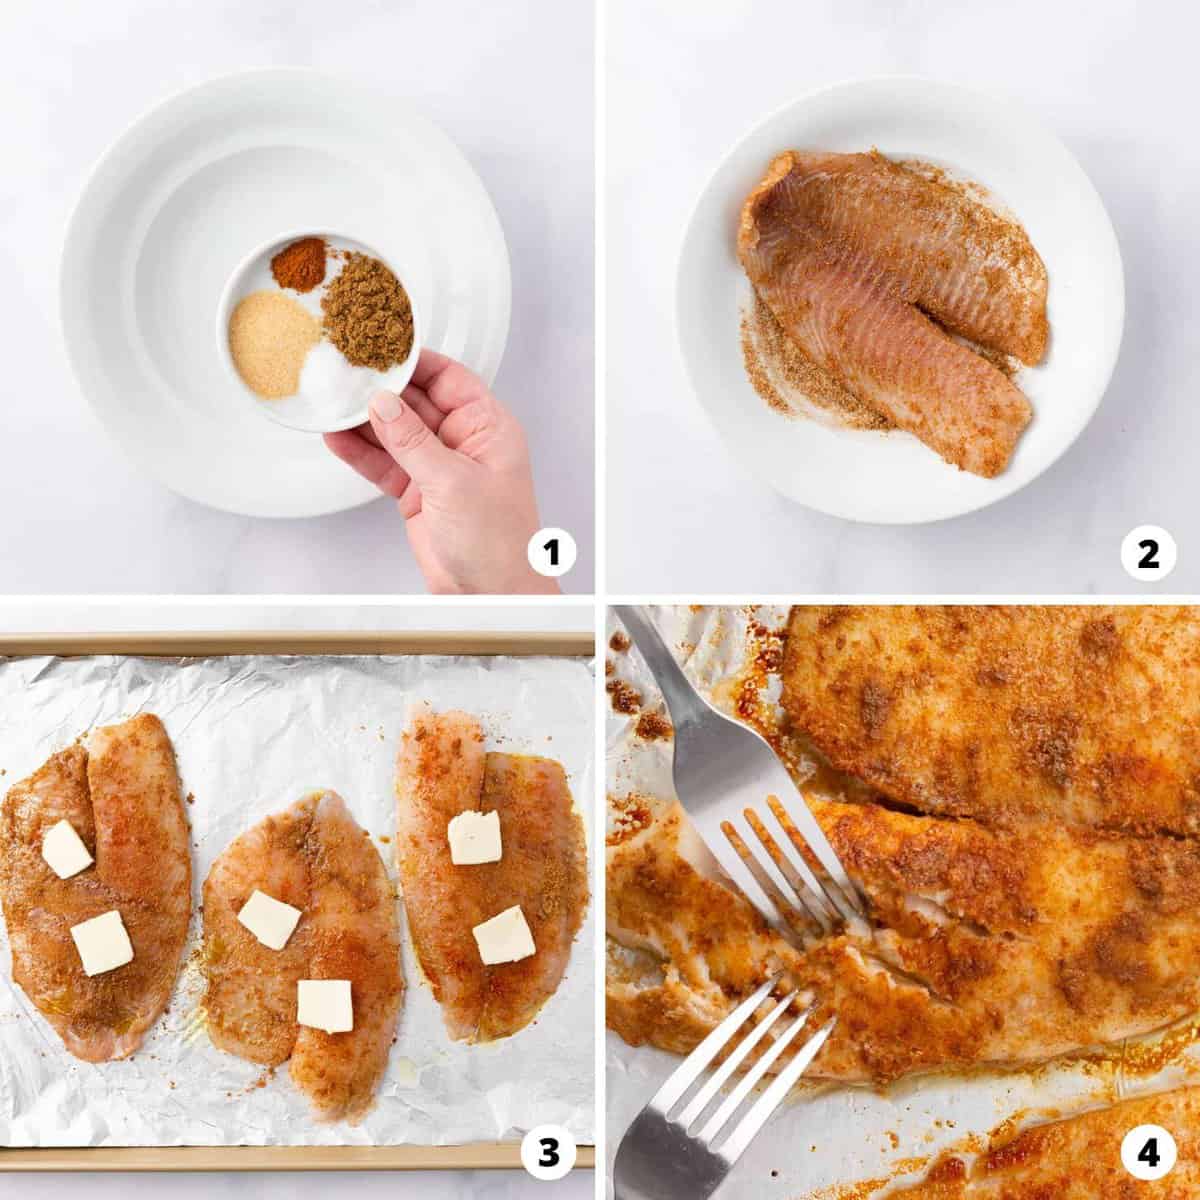 Showing how to make baked tilapia in a 4 step collage.